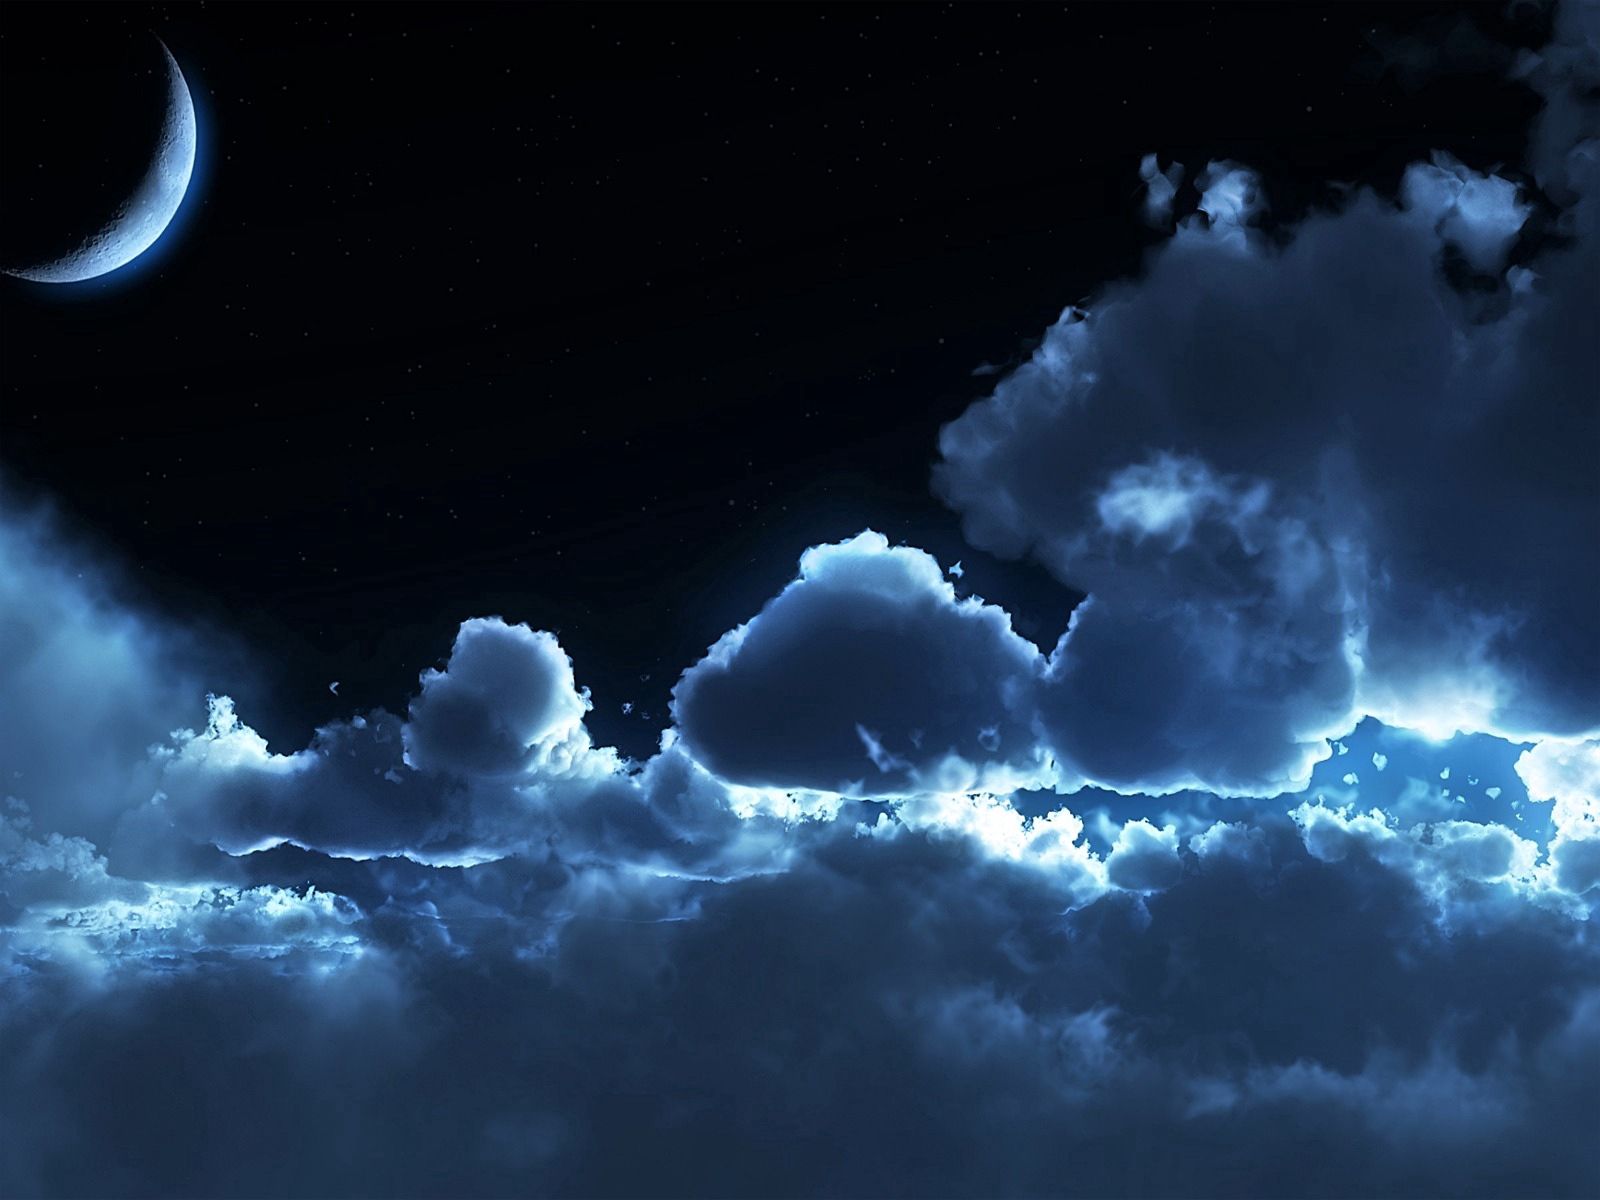 Download wallpaper 1600x1200 sky, night, clouds, air, stars, moon,  tranquillity hd background